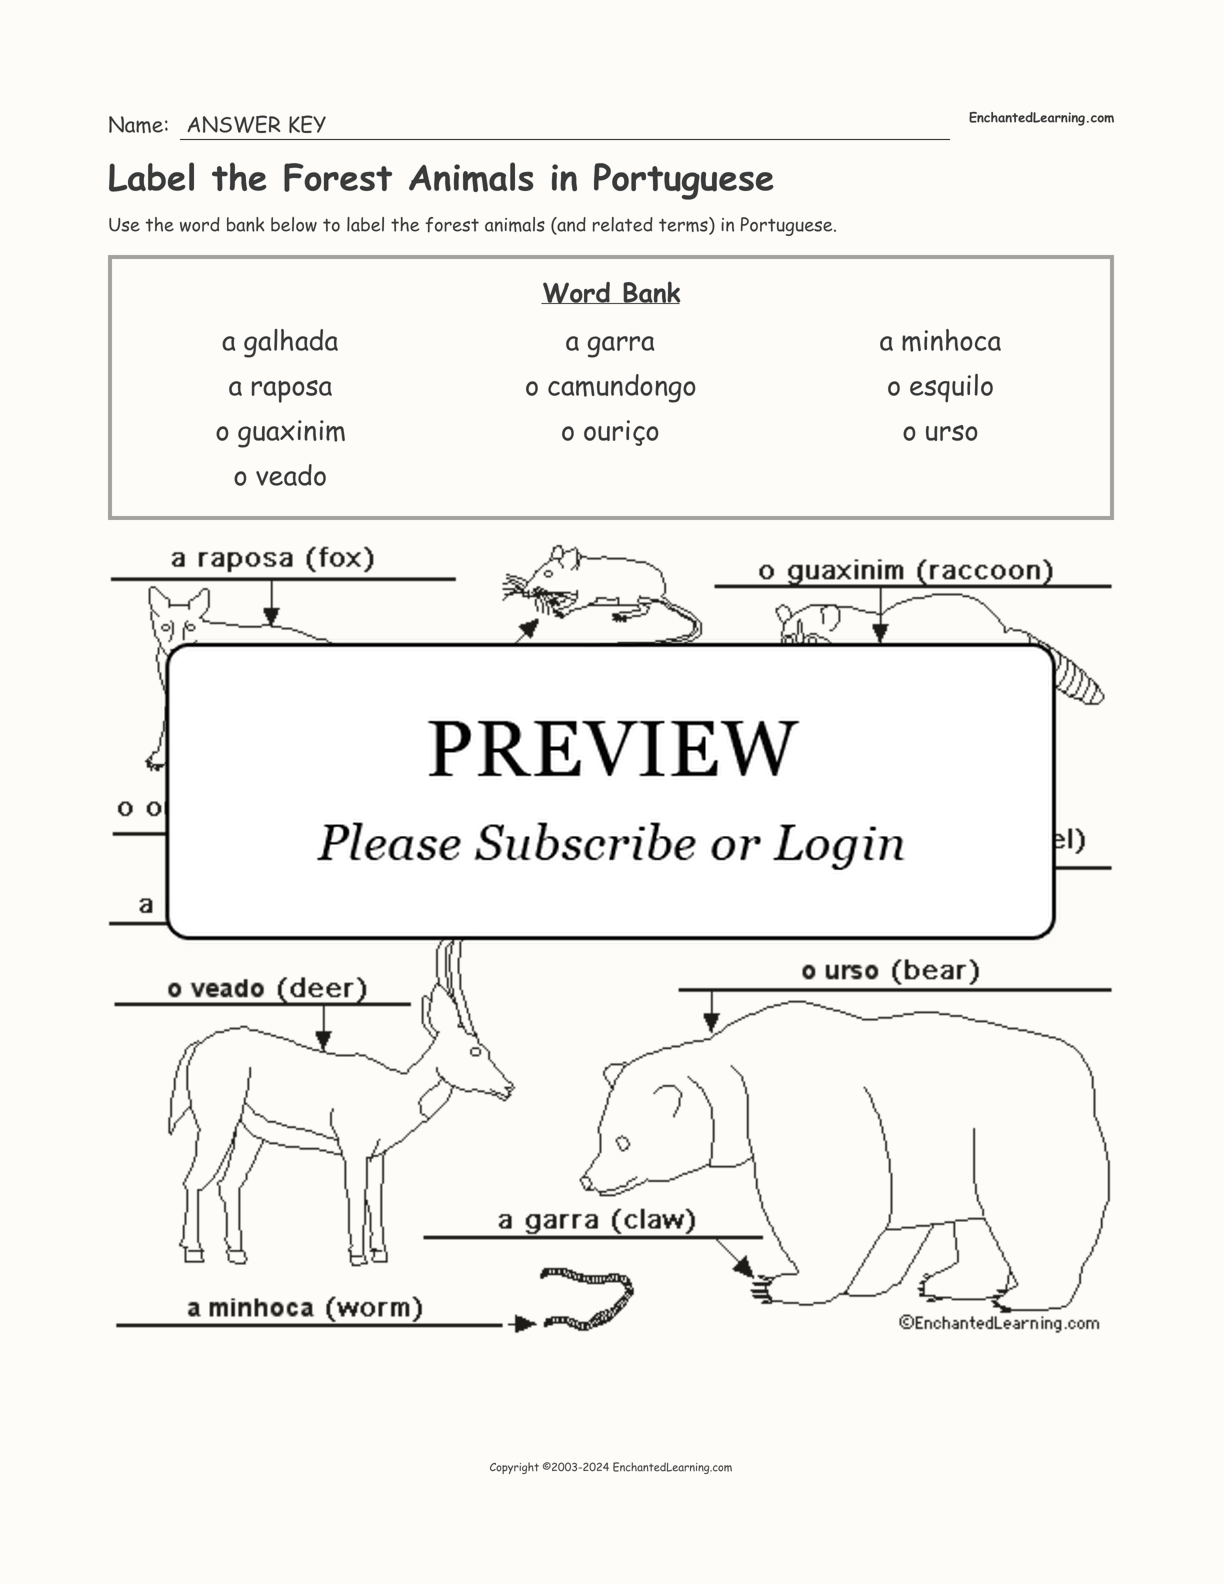 Label the Forest Animals in Portuguese interactive worksheet page 2